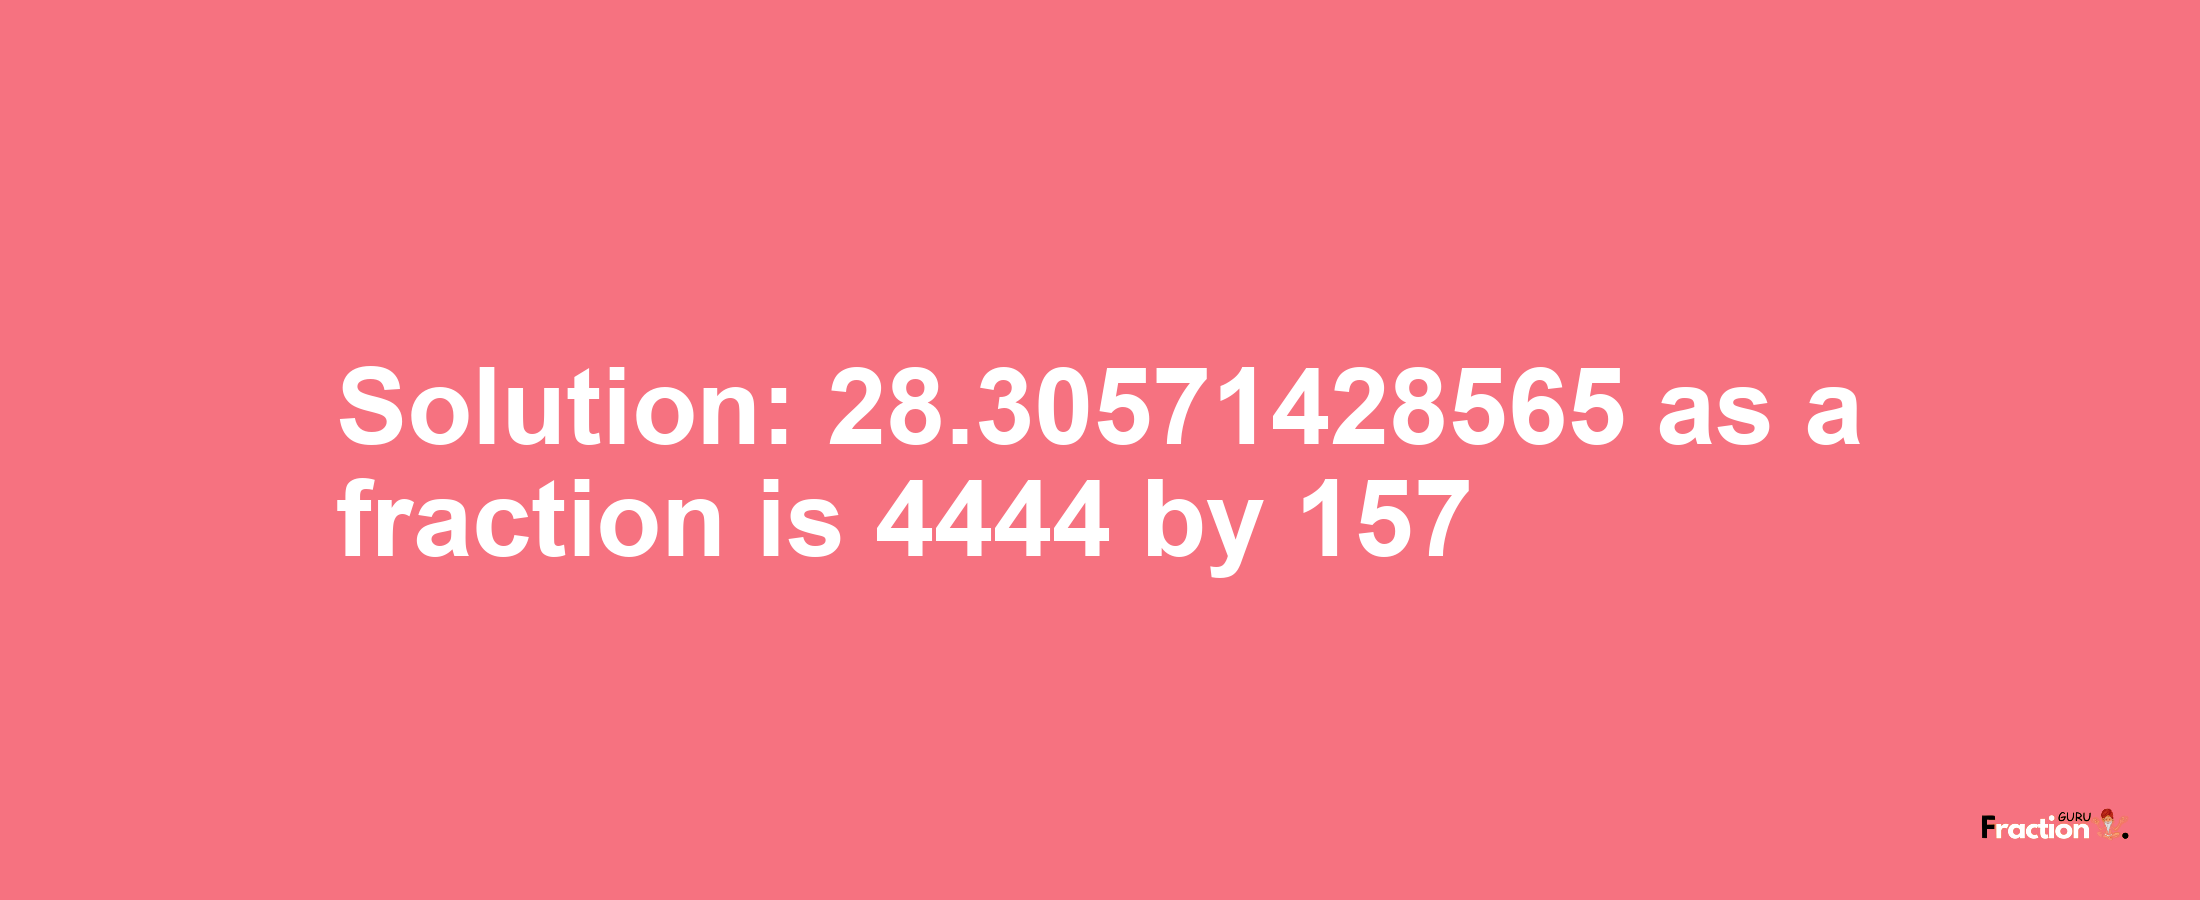 Solution:28.30571428565 as a fraction is 4444/157